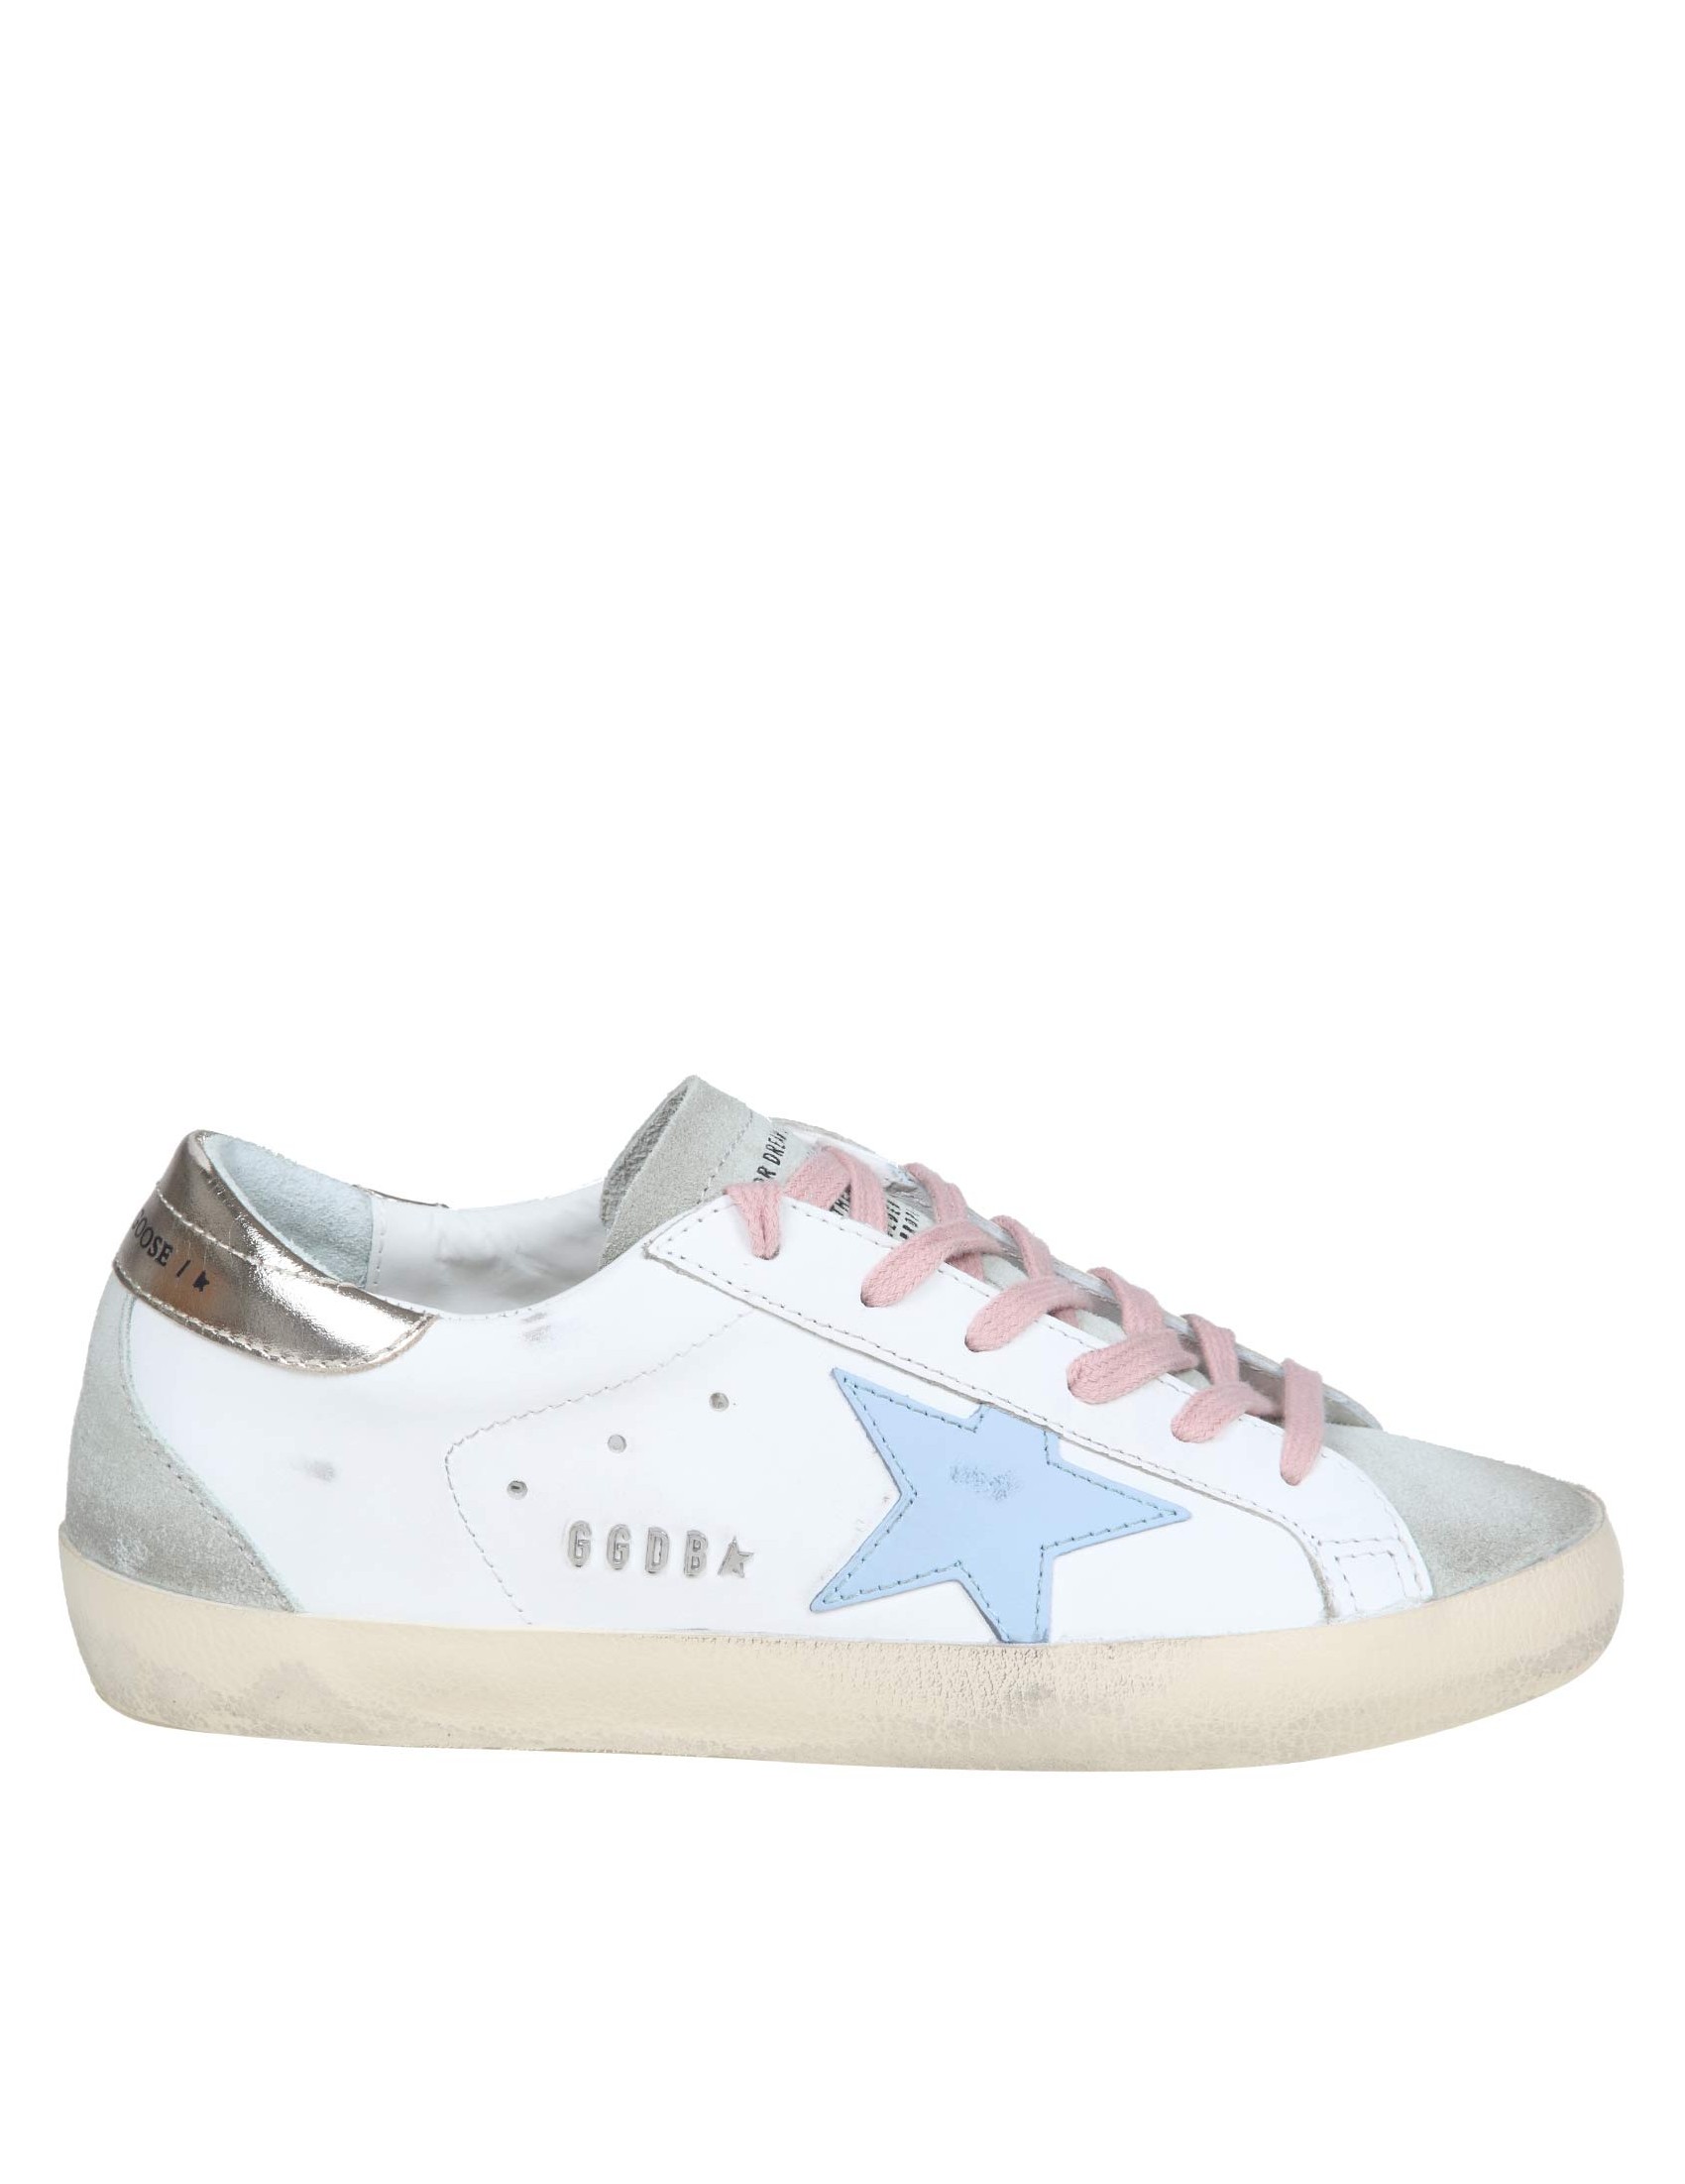 GOLDEN GOOSE SUPER STAR SNEAKERS IN WHITE LEATHER